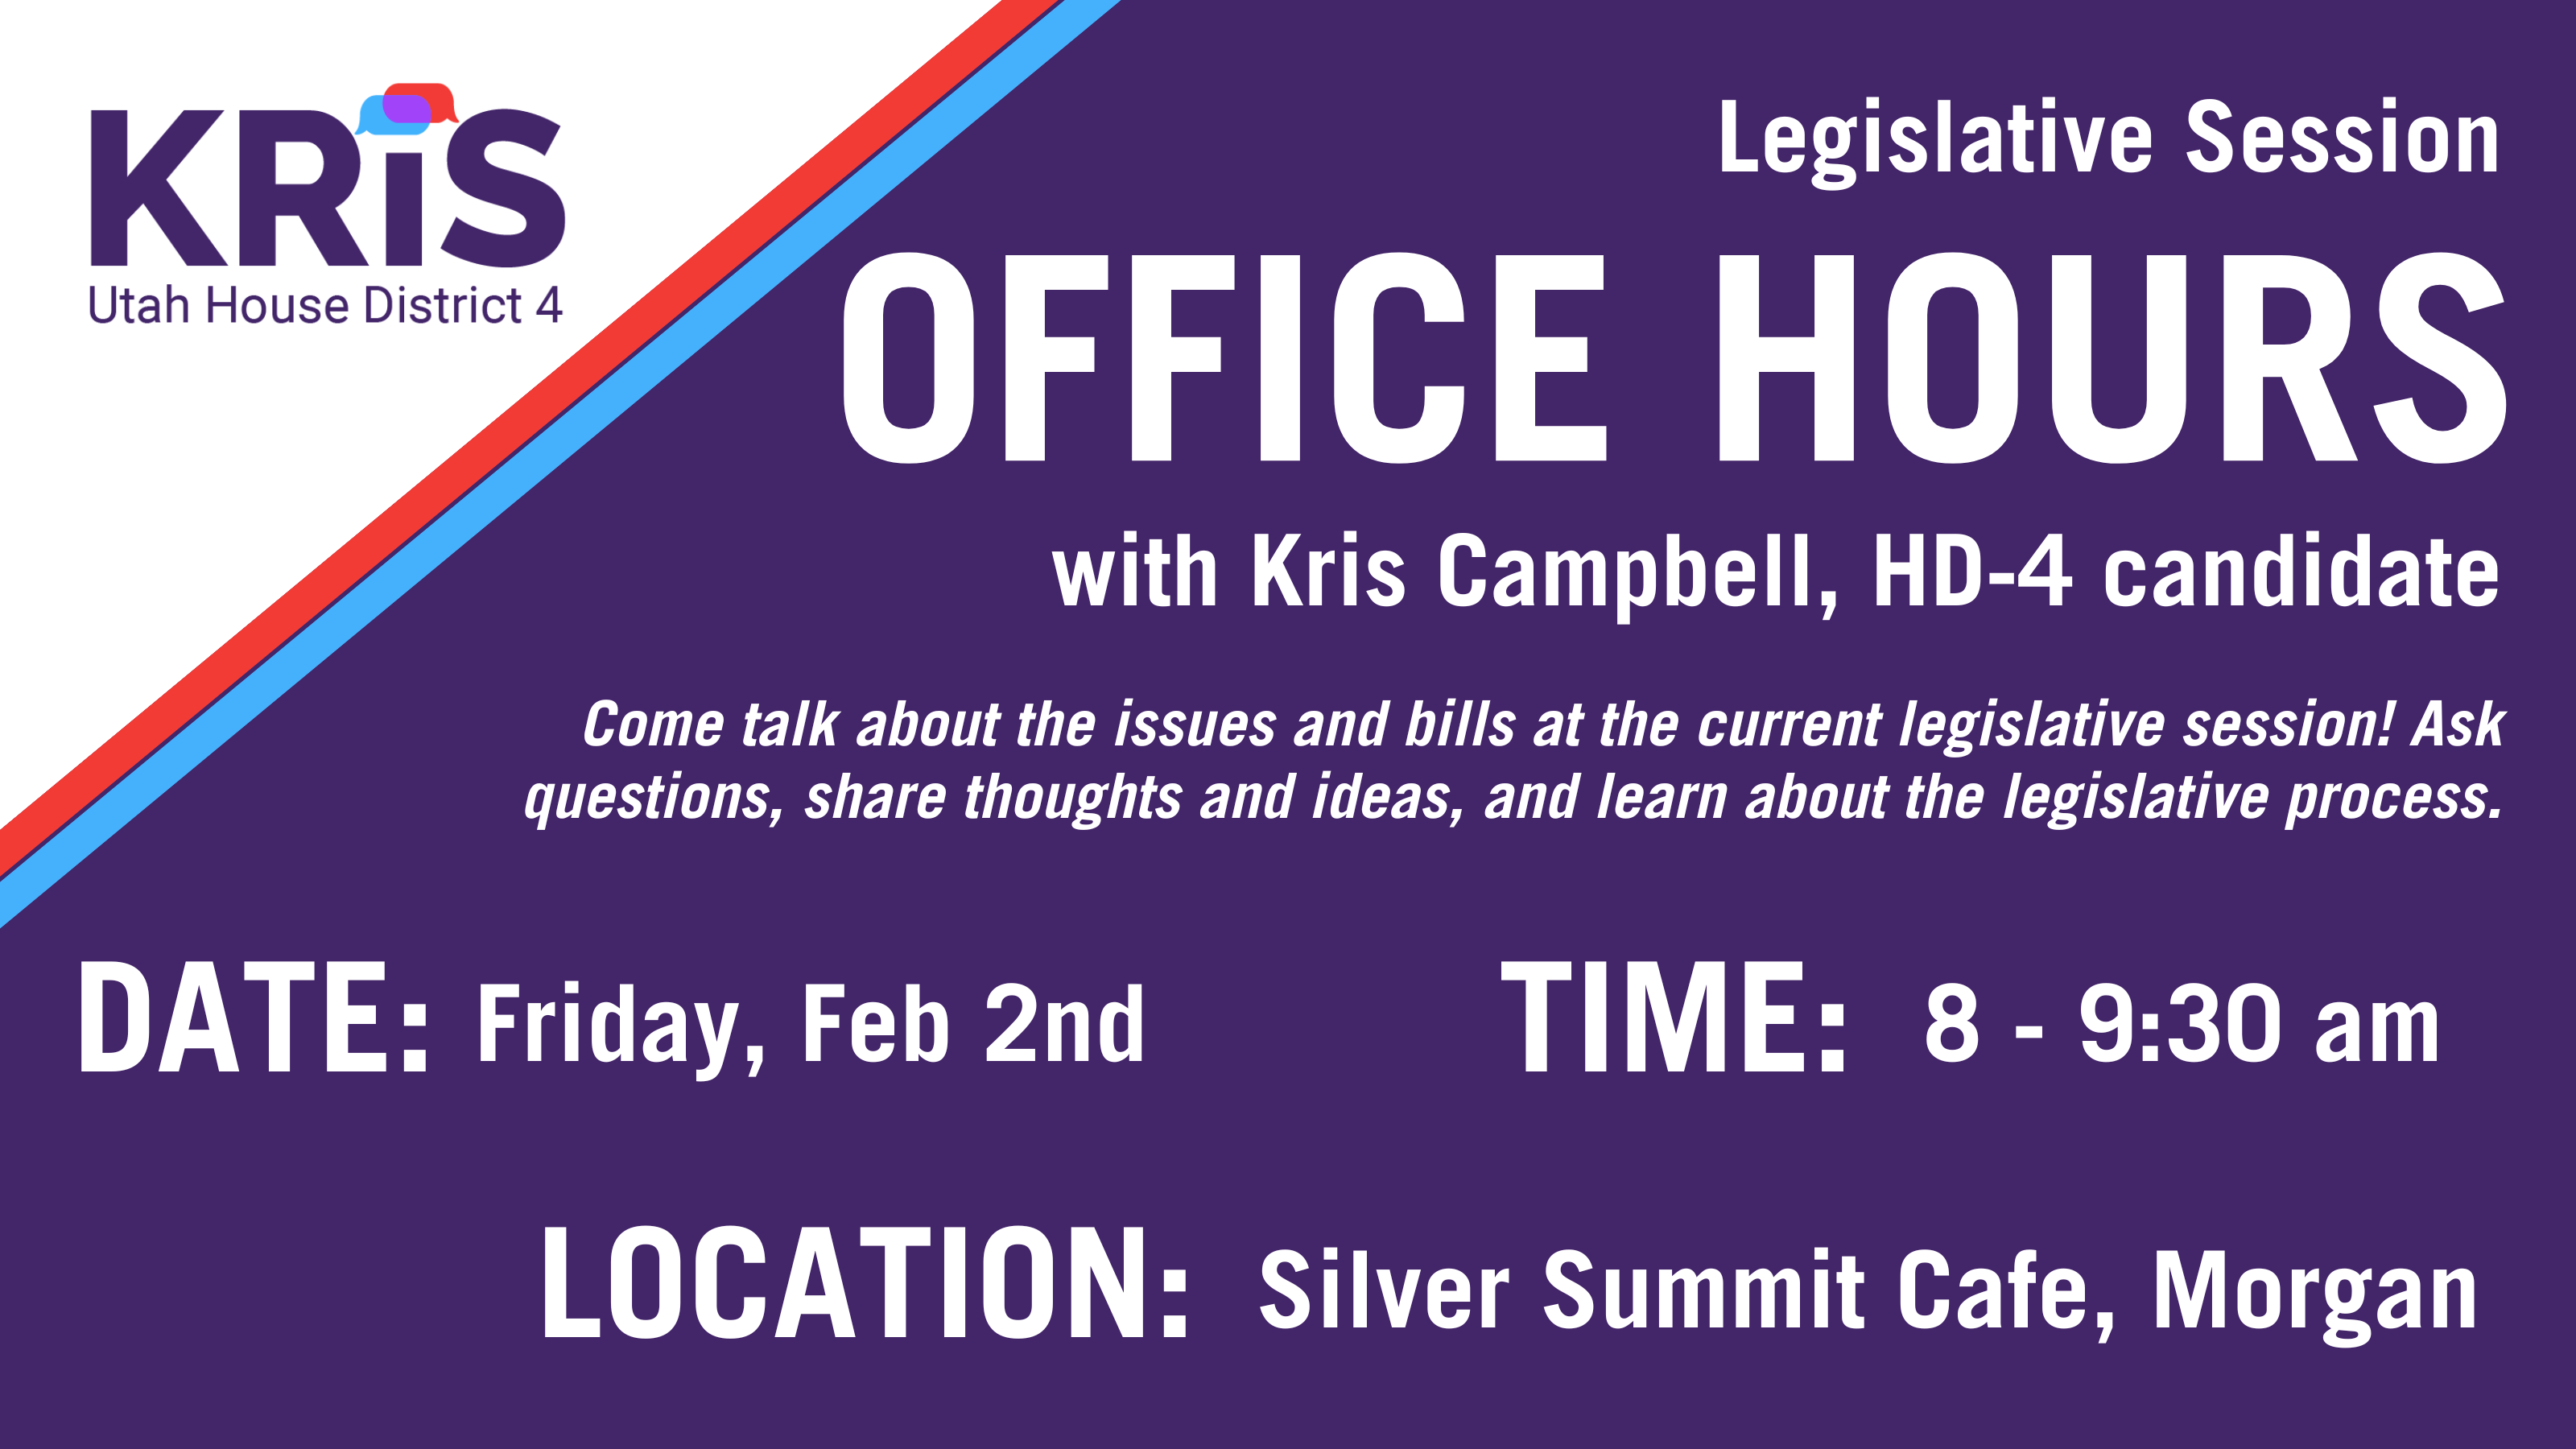 Legislative Session Office Hours with Kris Campbell, HD 4 Candidate. Friday, Feb 2nd from 8-9:30 am at the cafe in the 7-Eleven in Morgan